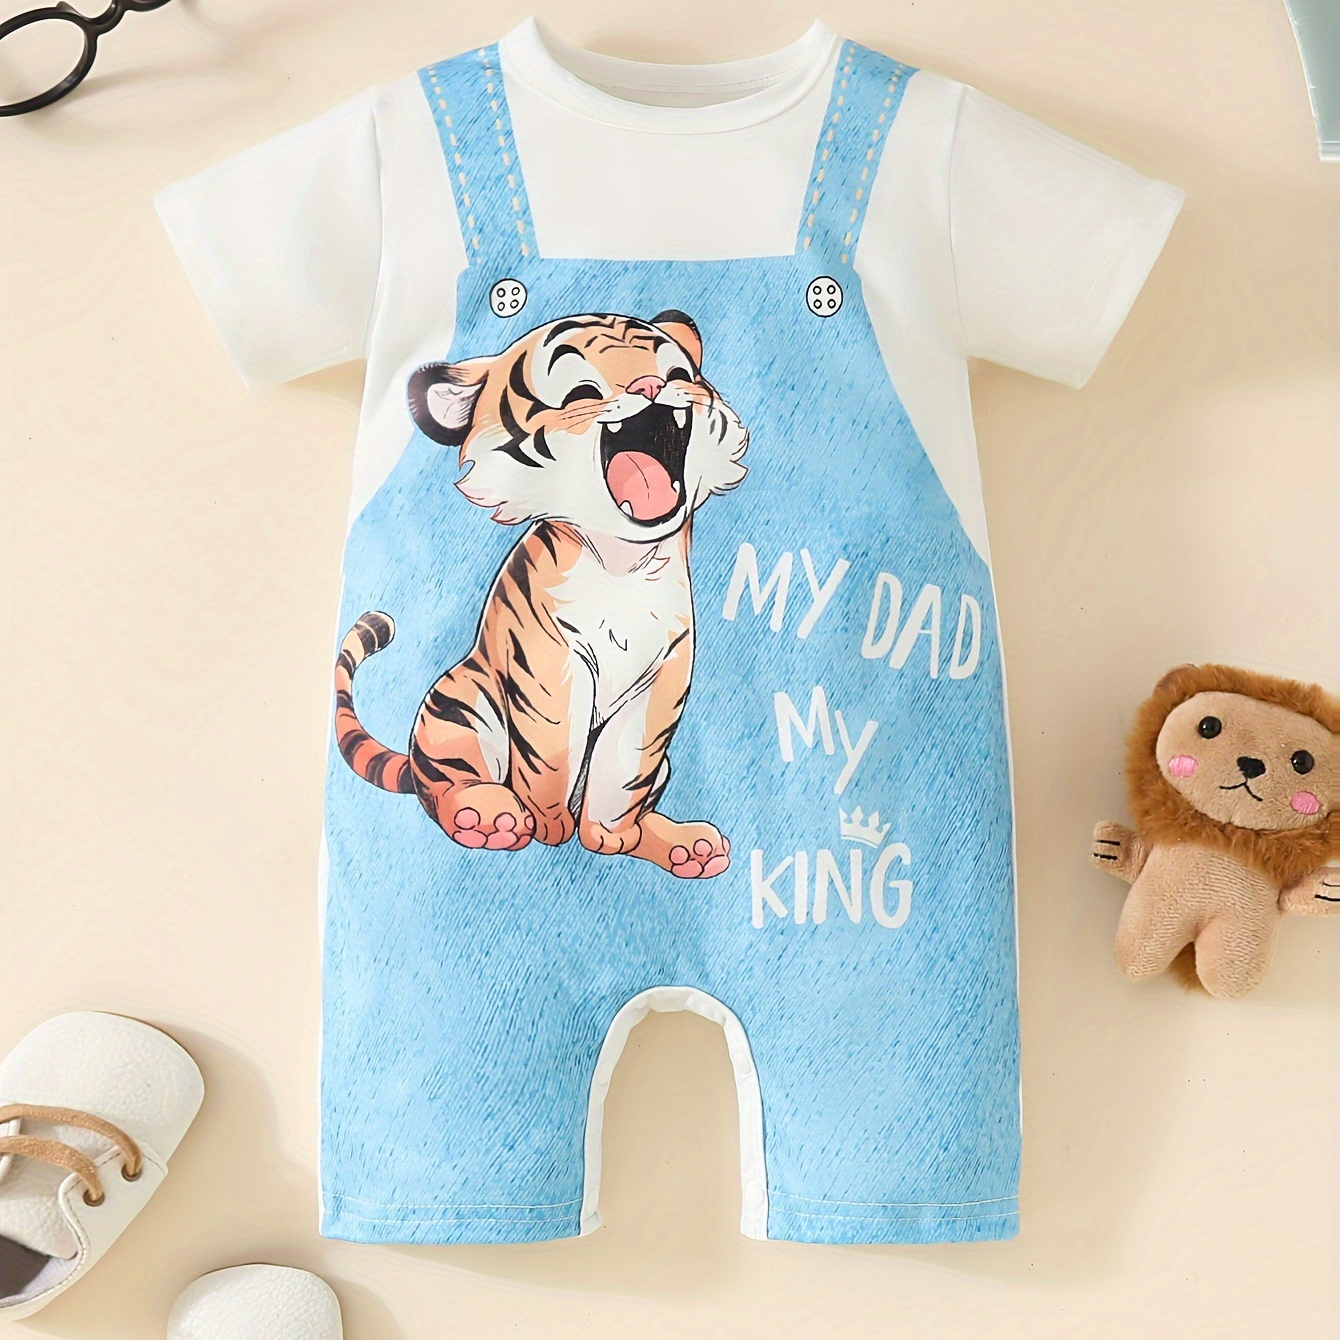 

Baby Boys Summer Short Sleeve Romper, Cute Tiger Print One-piece Bodysuit, Casual Comfortable Clothing With Snap Closure